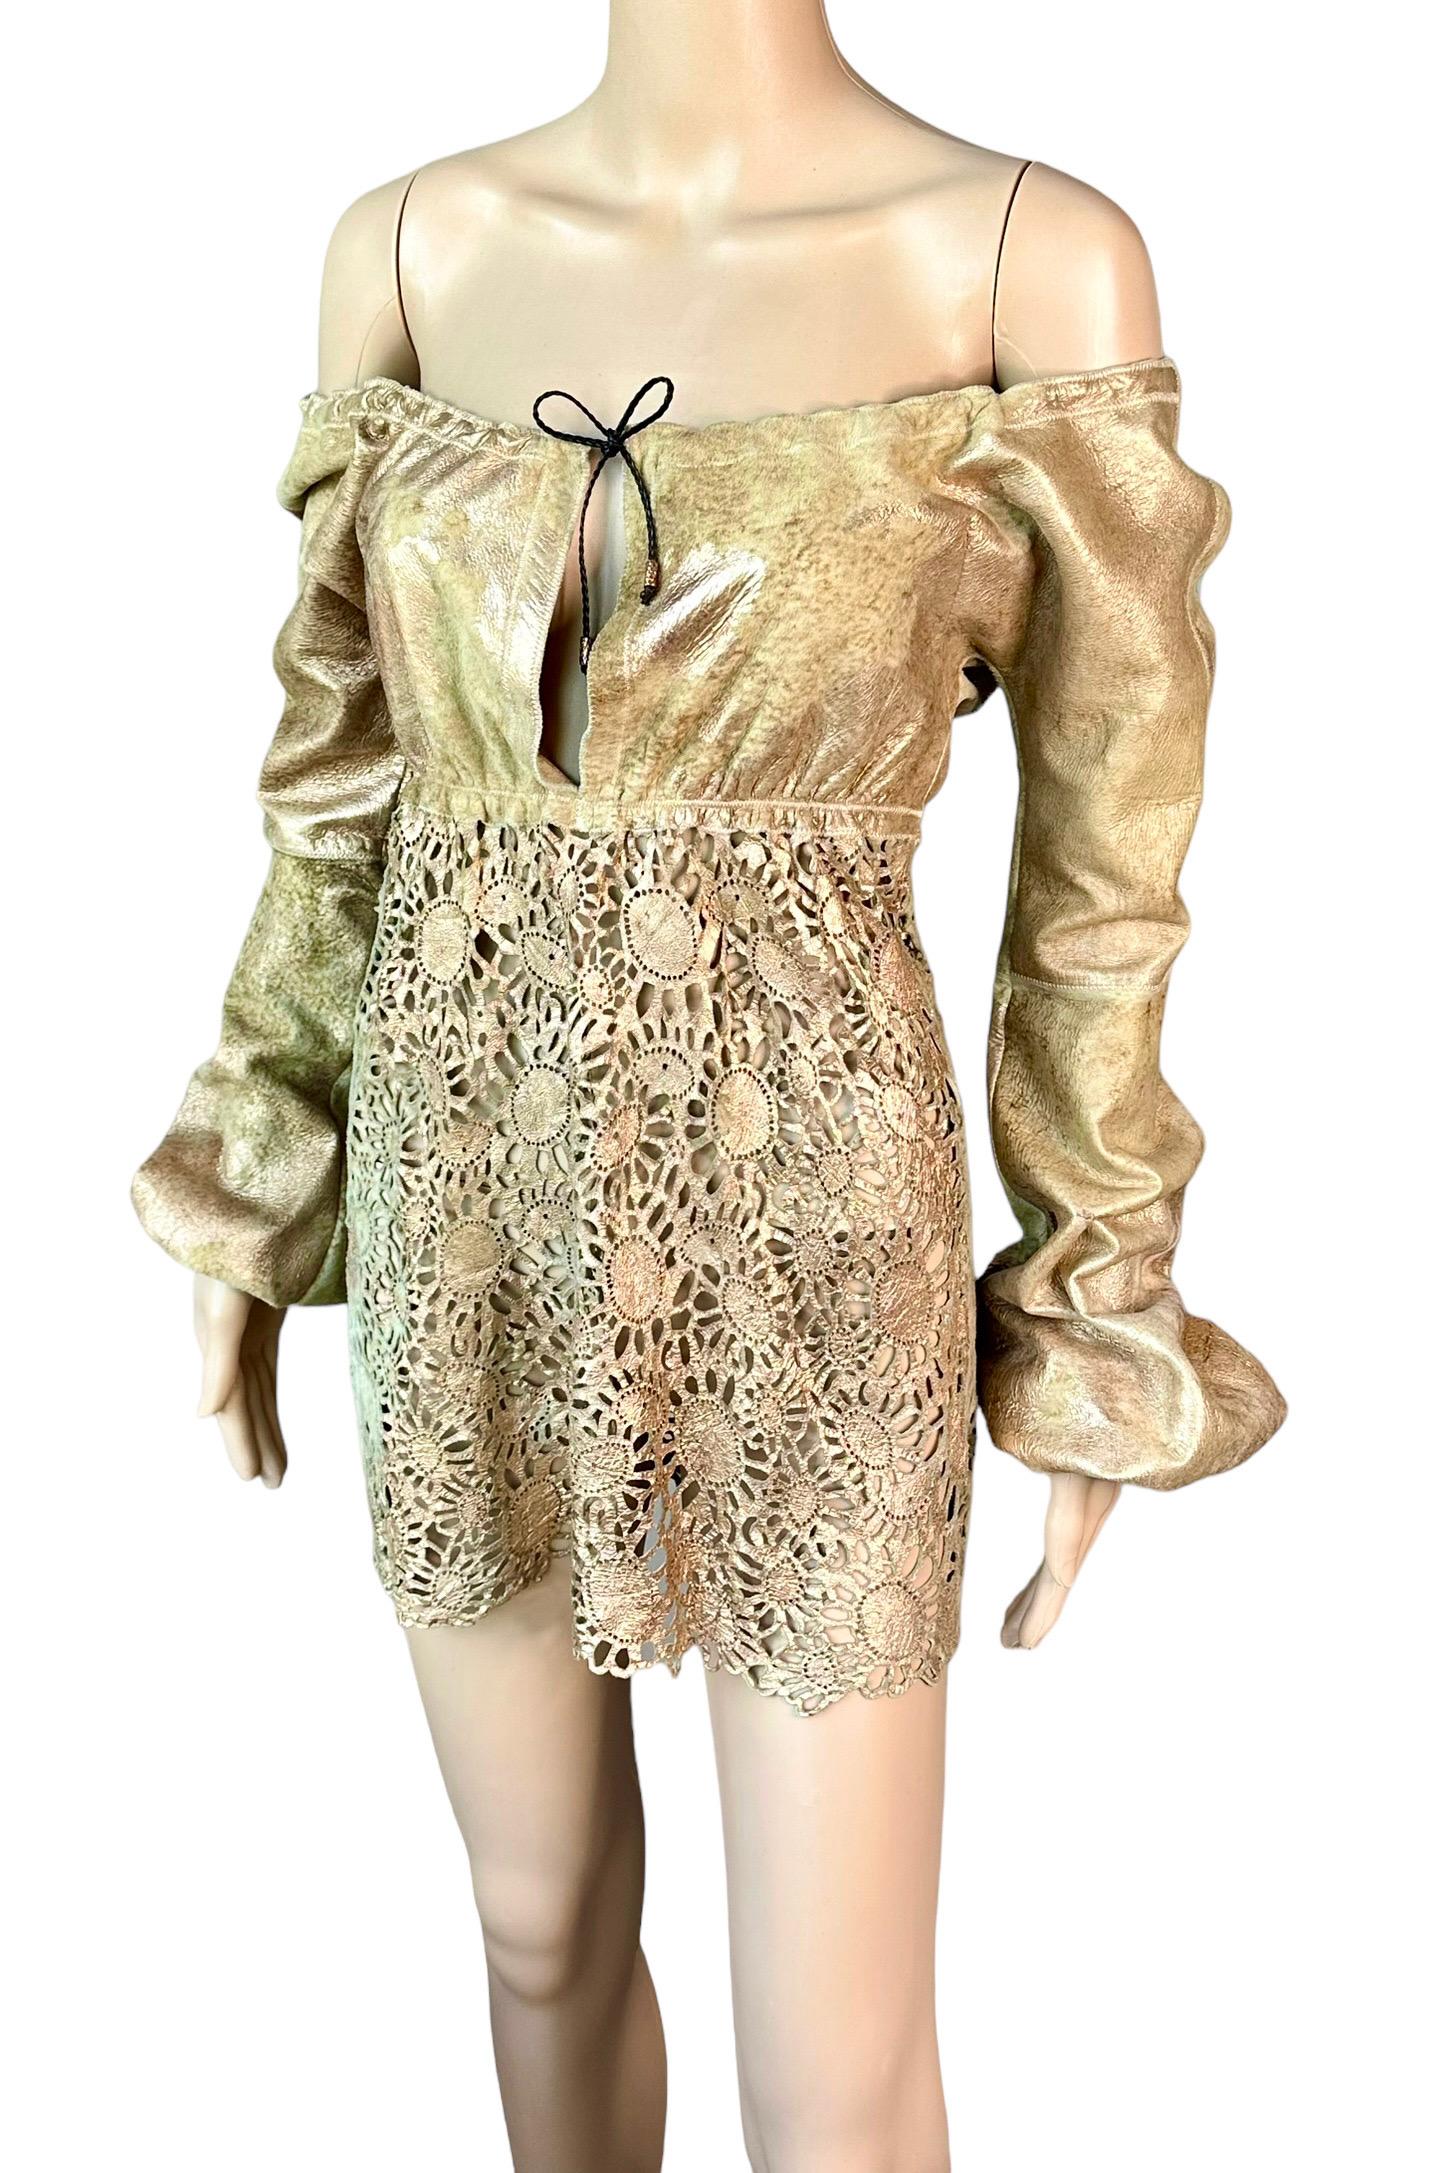 Roberto Cavalli S/S 2002 Runway Metallic Leather Off Shoulder Eyelet Mini Dress Size S

Look 9 from the Spring 2002 Collection.

FOLLOW US ON INSTAGRAM @OPULENTADDICT

